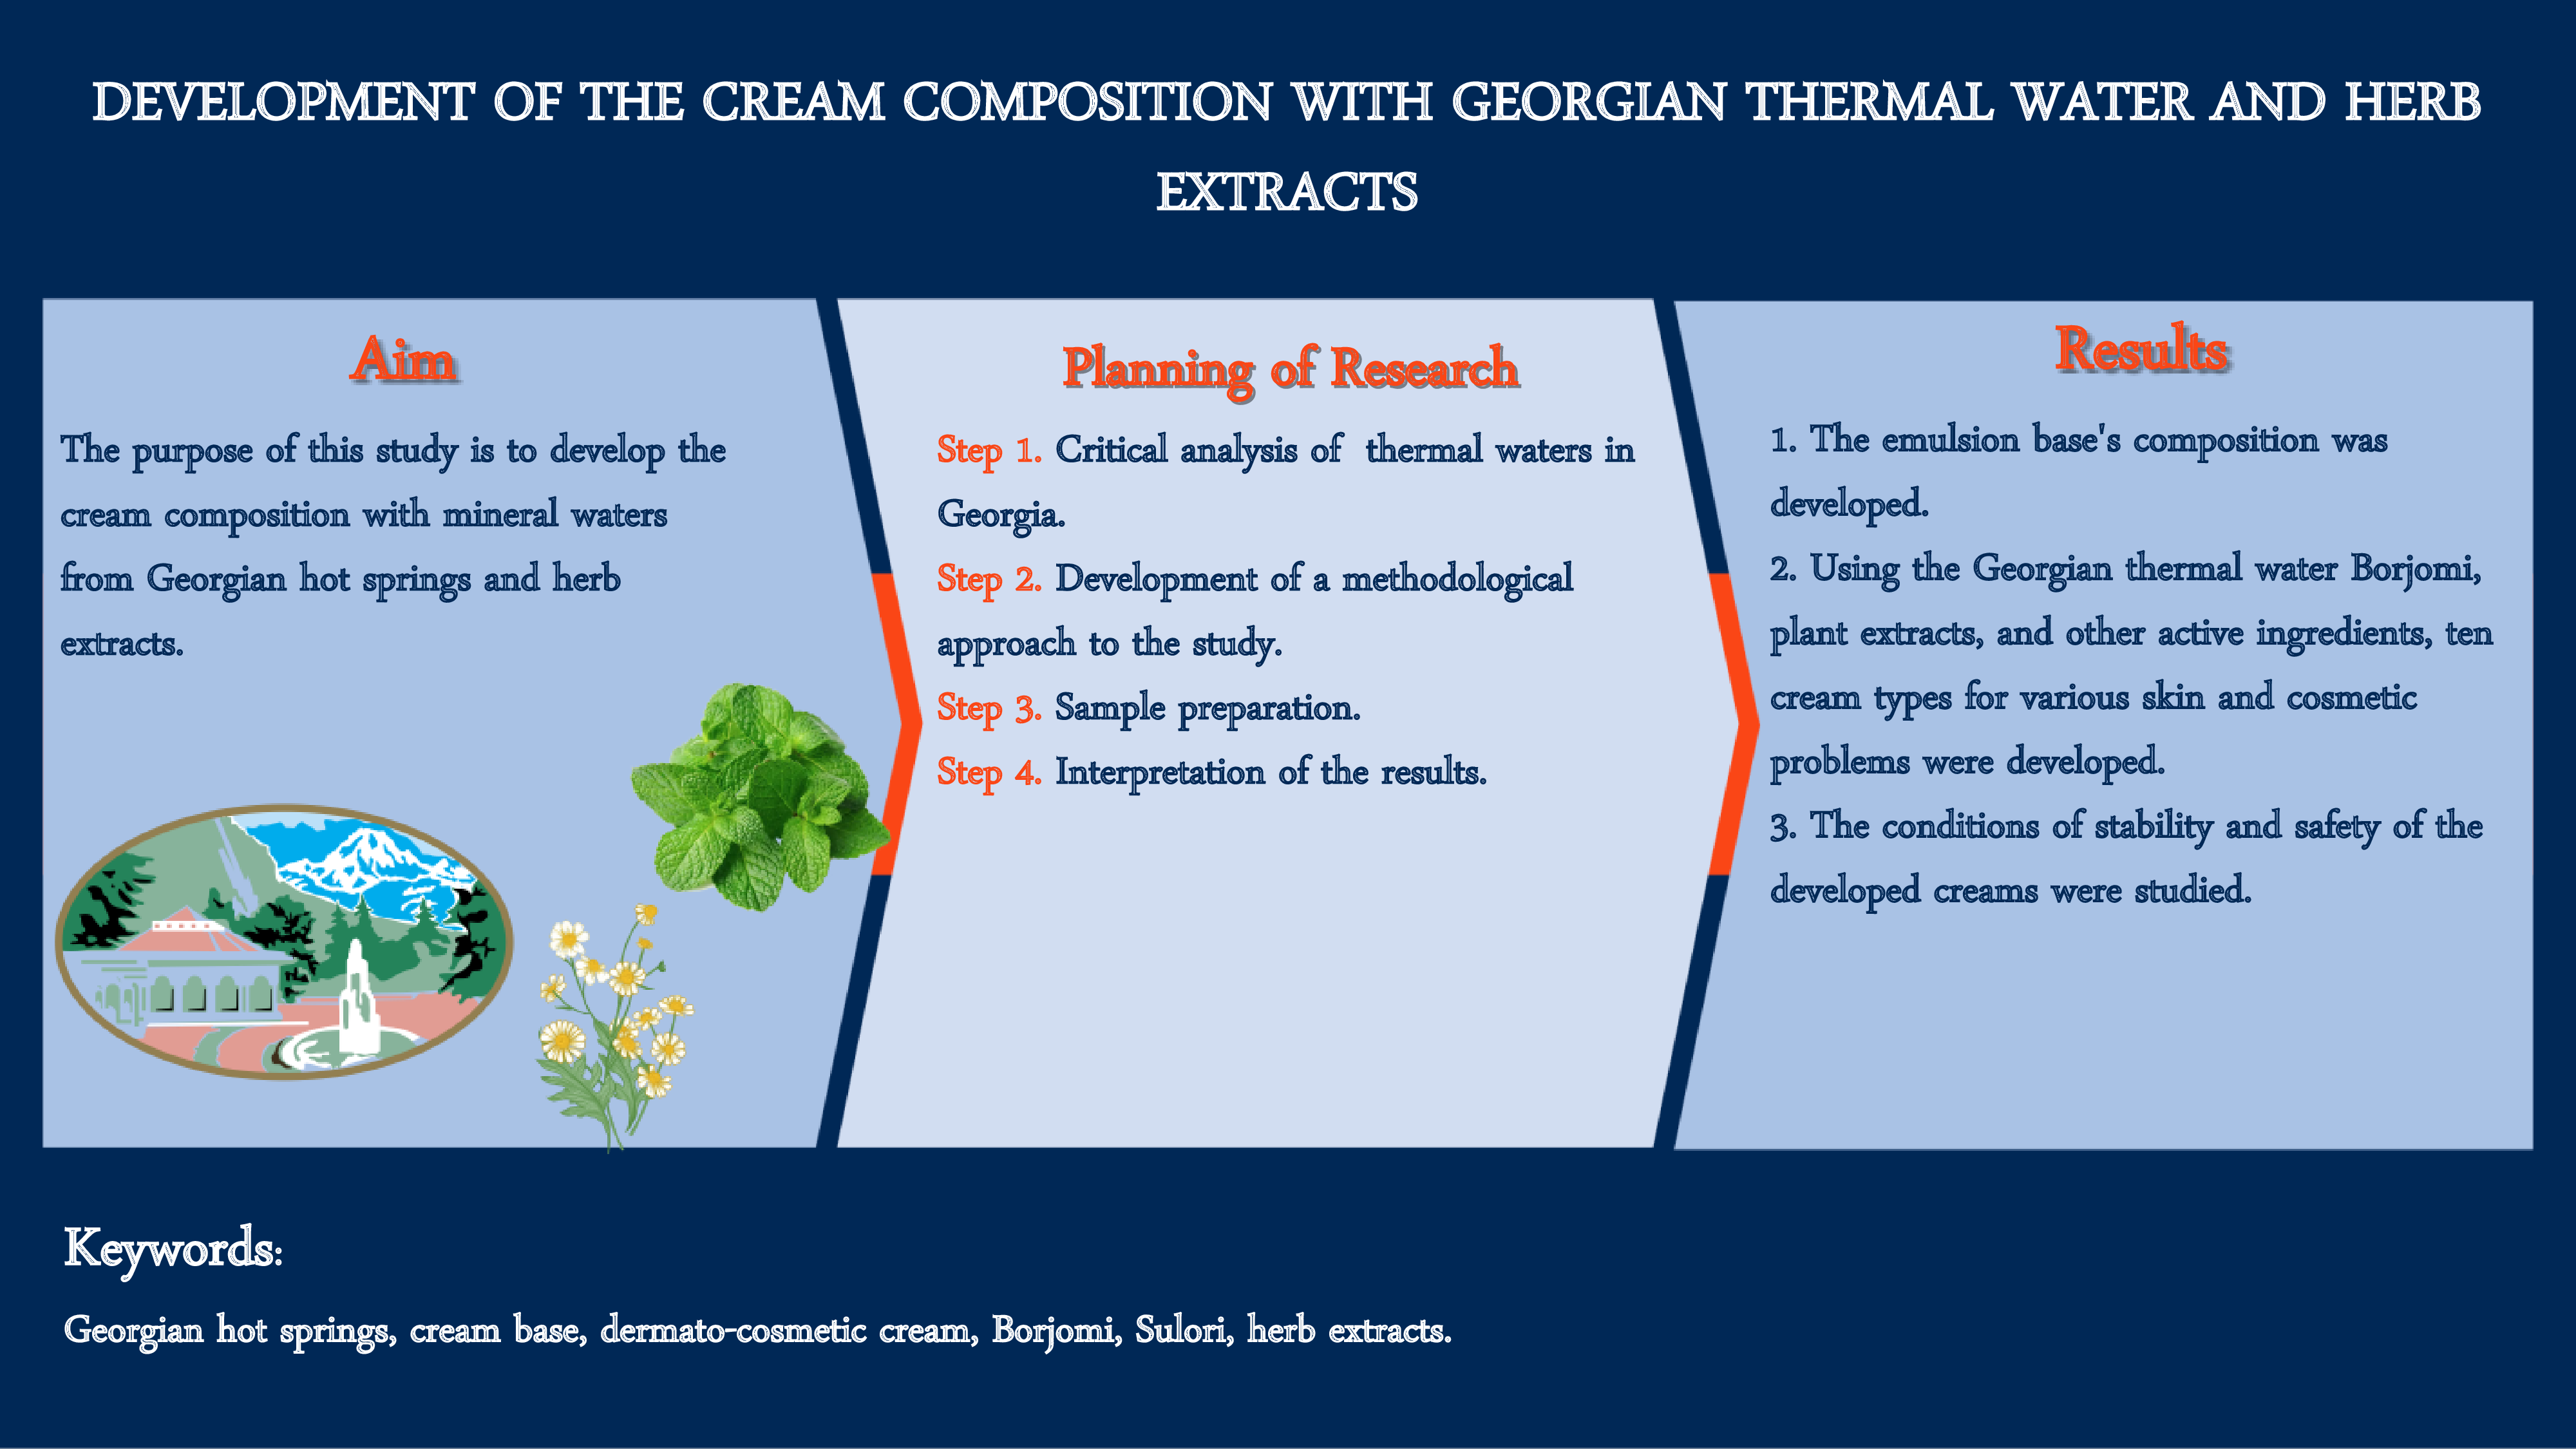 Development of the cream composition with Georgian thermal water and herb extracts